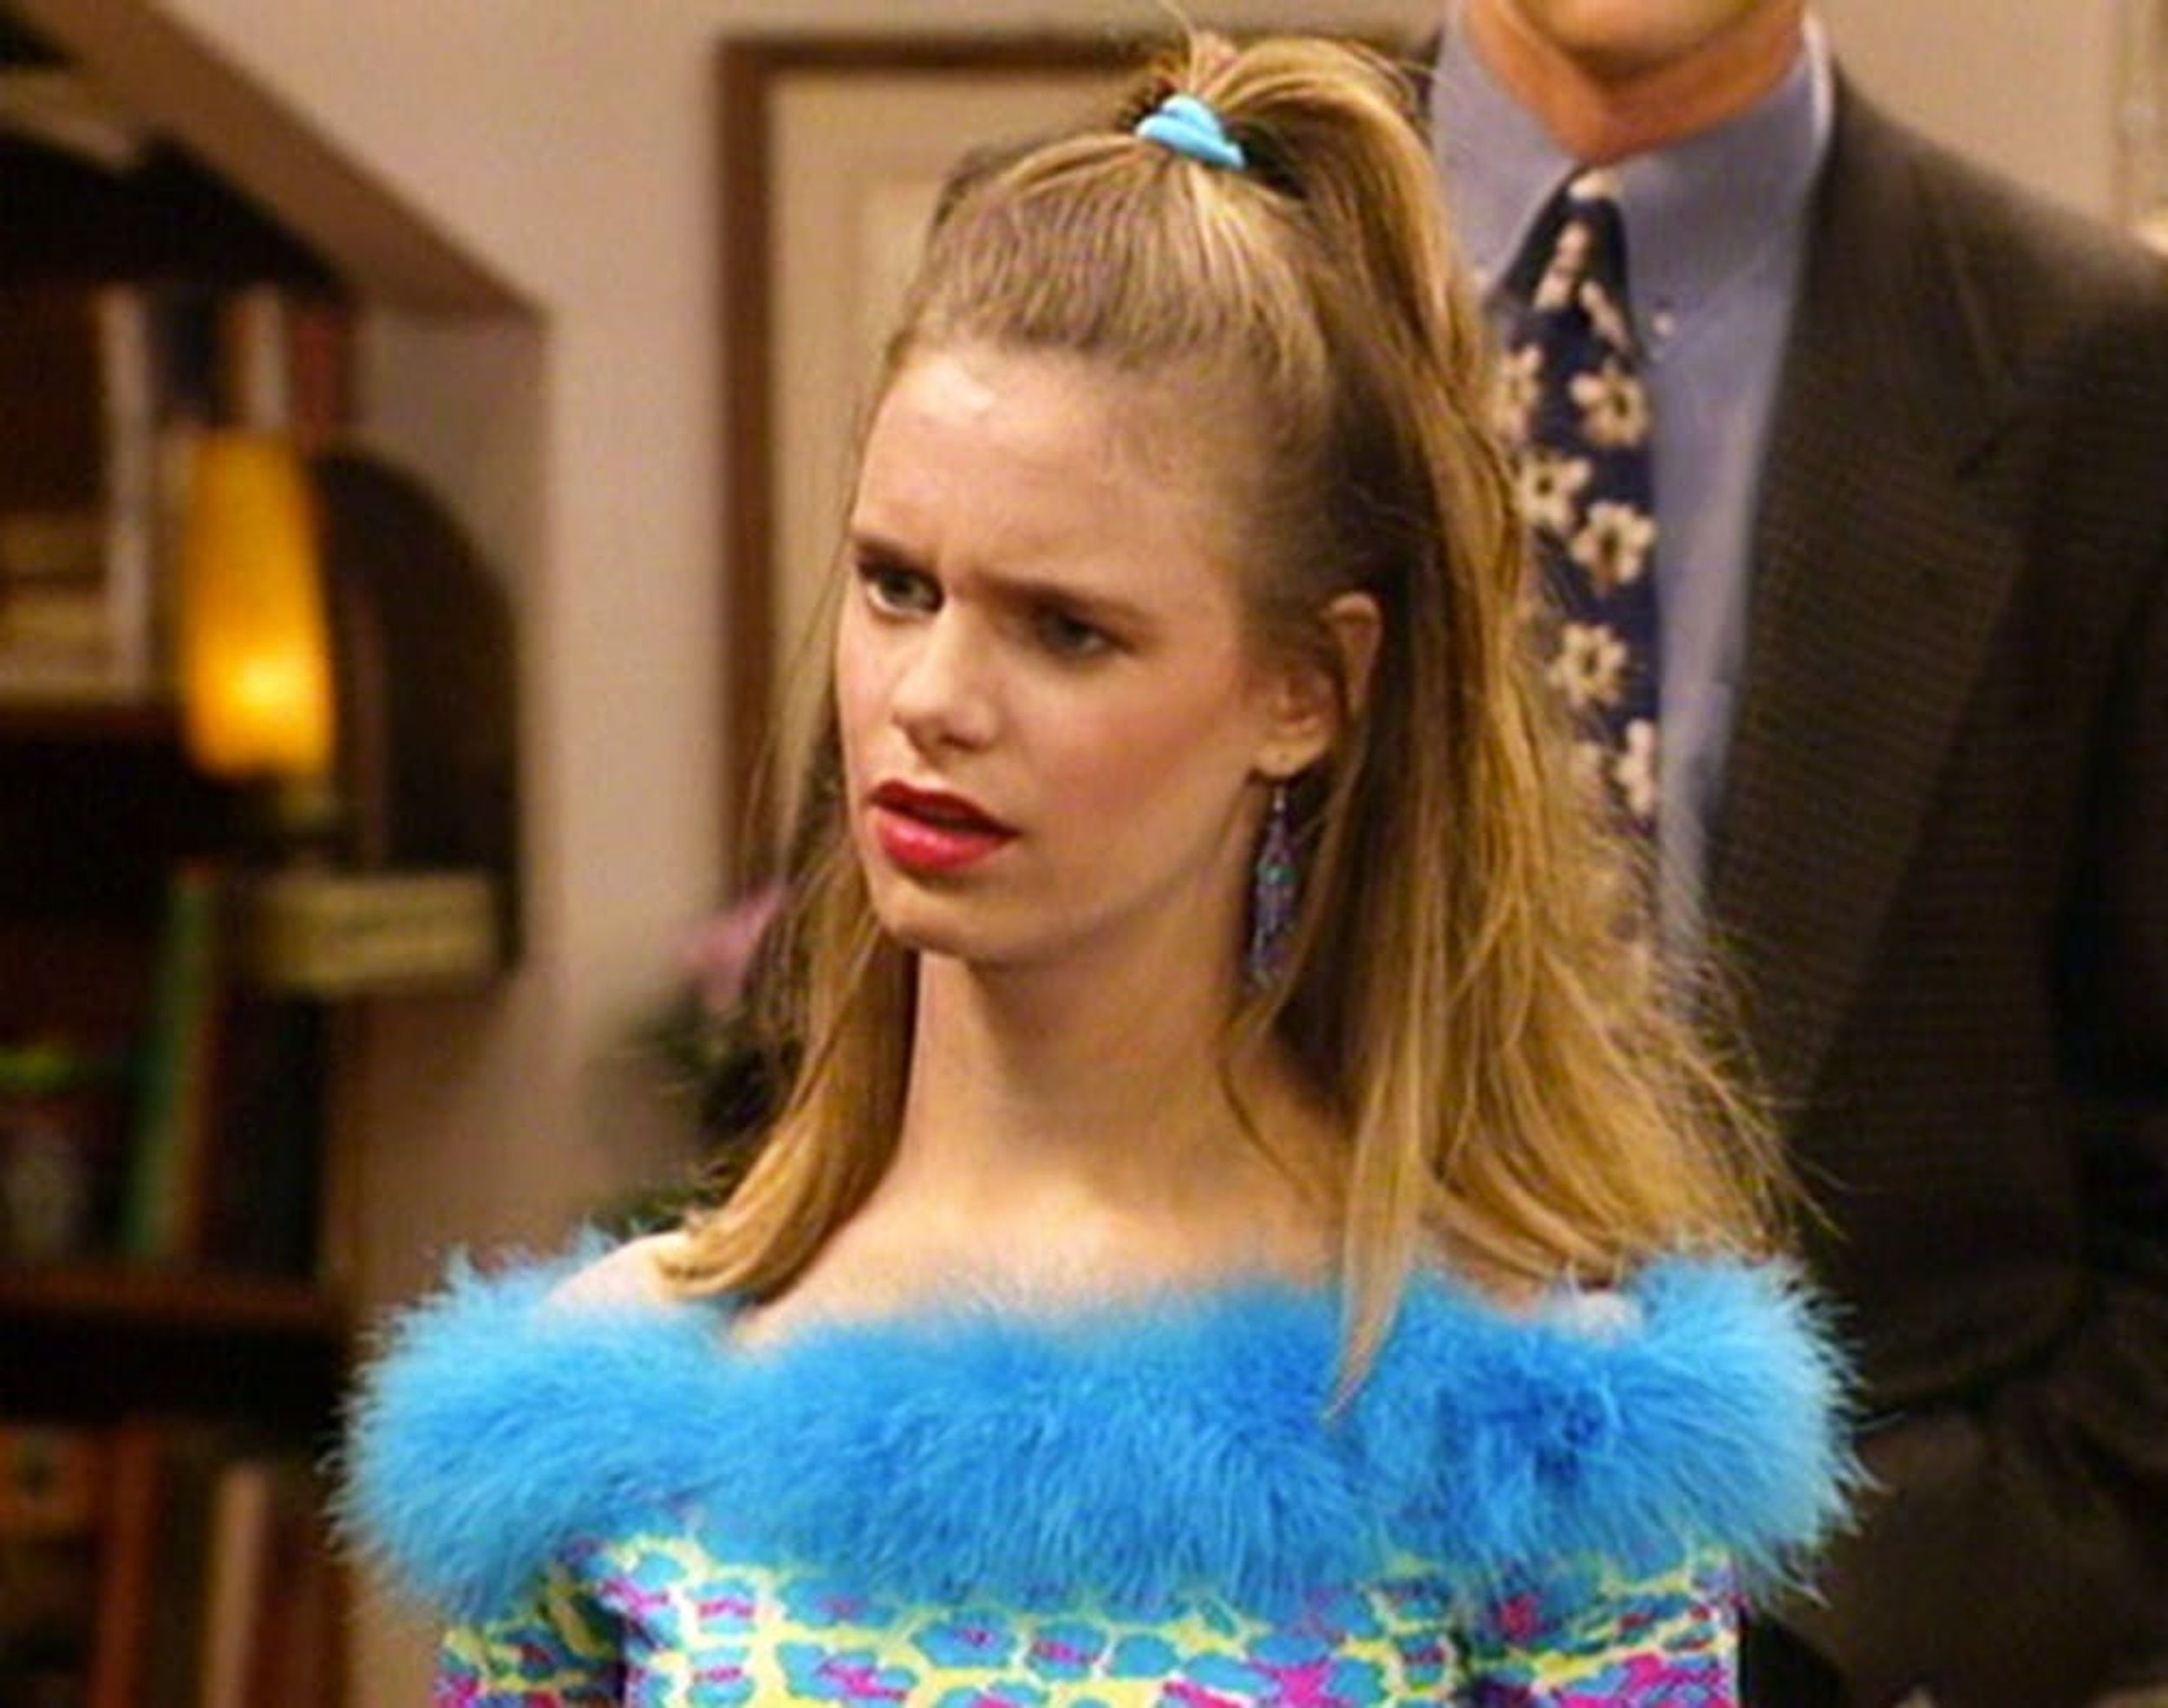 This Kimmy Gibbler Costume Contest Is the Only One You Need to Enter